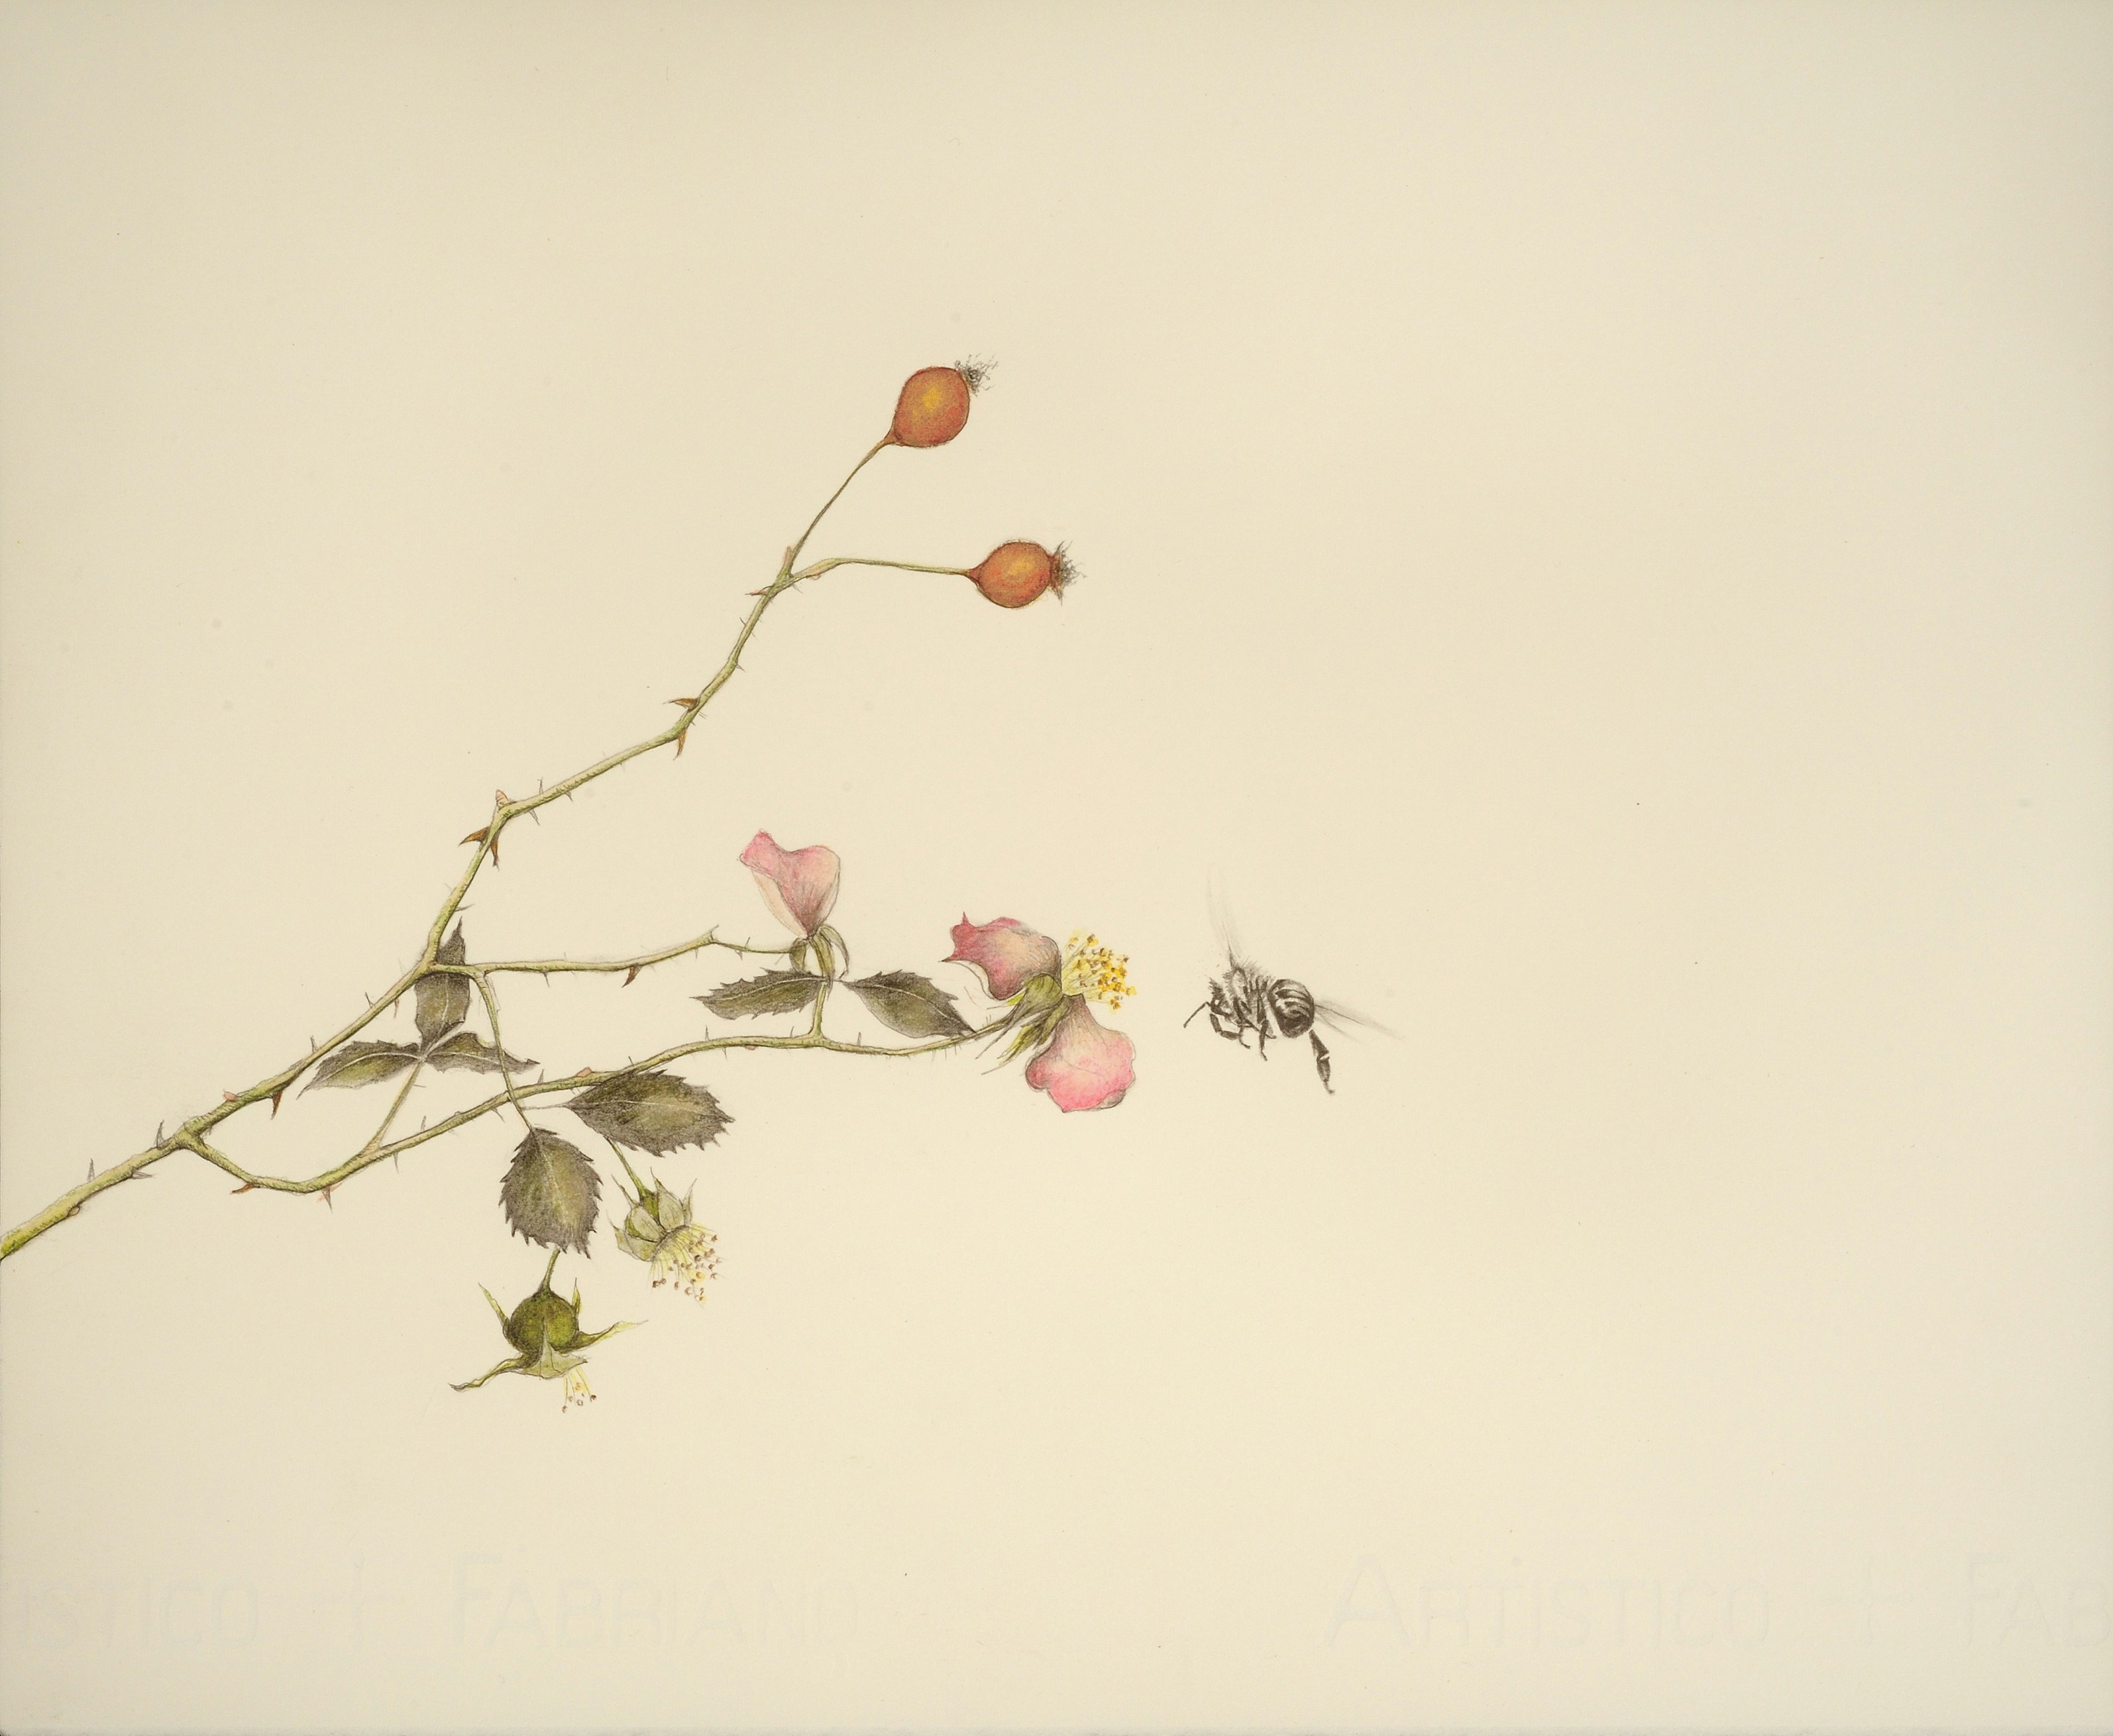 Rebecca Clark: "Bee 17 (Prana)," 2011, graphite and colored pencil on paper, 11.25 x 13.25 in. (from Book of Hours)